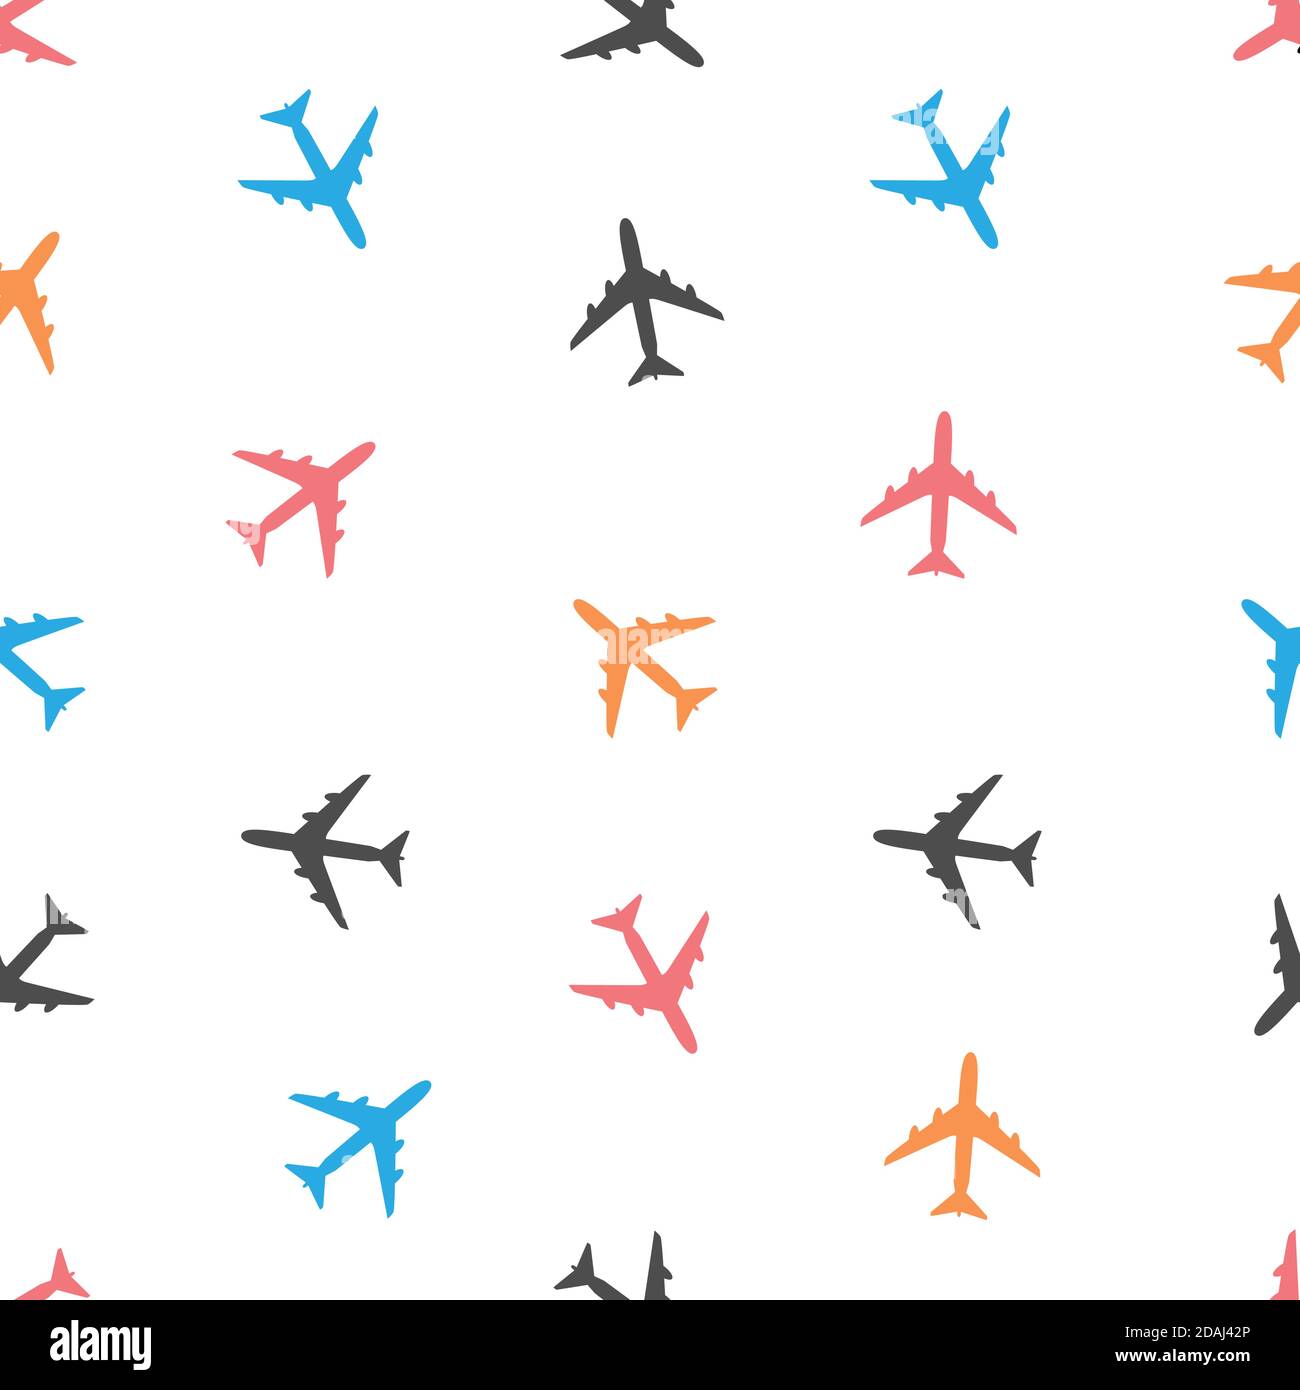 Airplane Seamless Pattern on Background Vector Illustration Stock Vector